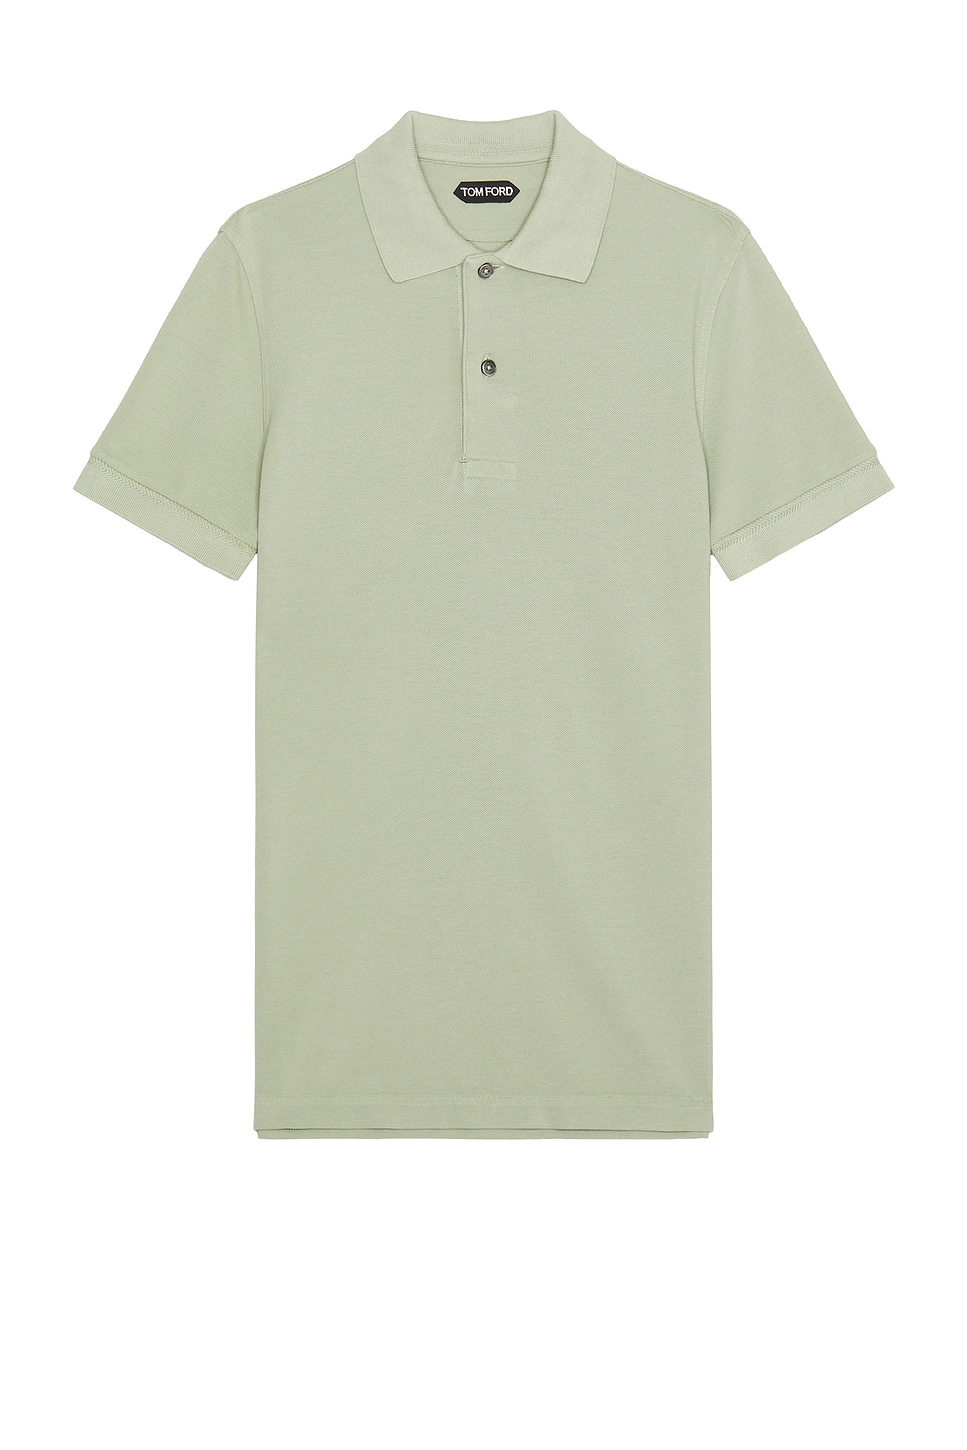 Image 1 of TOM FORD Tennis Piquet Short Sleeve Polo in Menthol